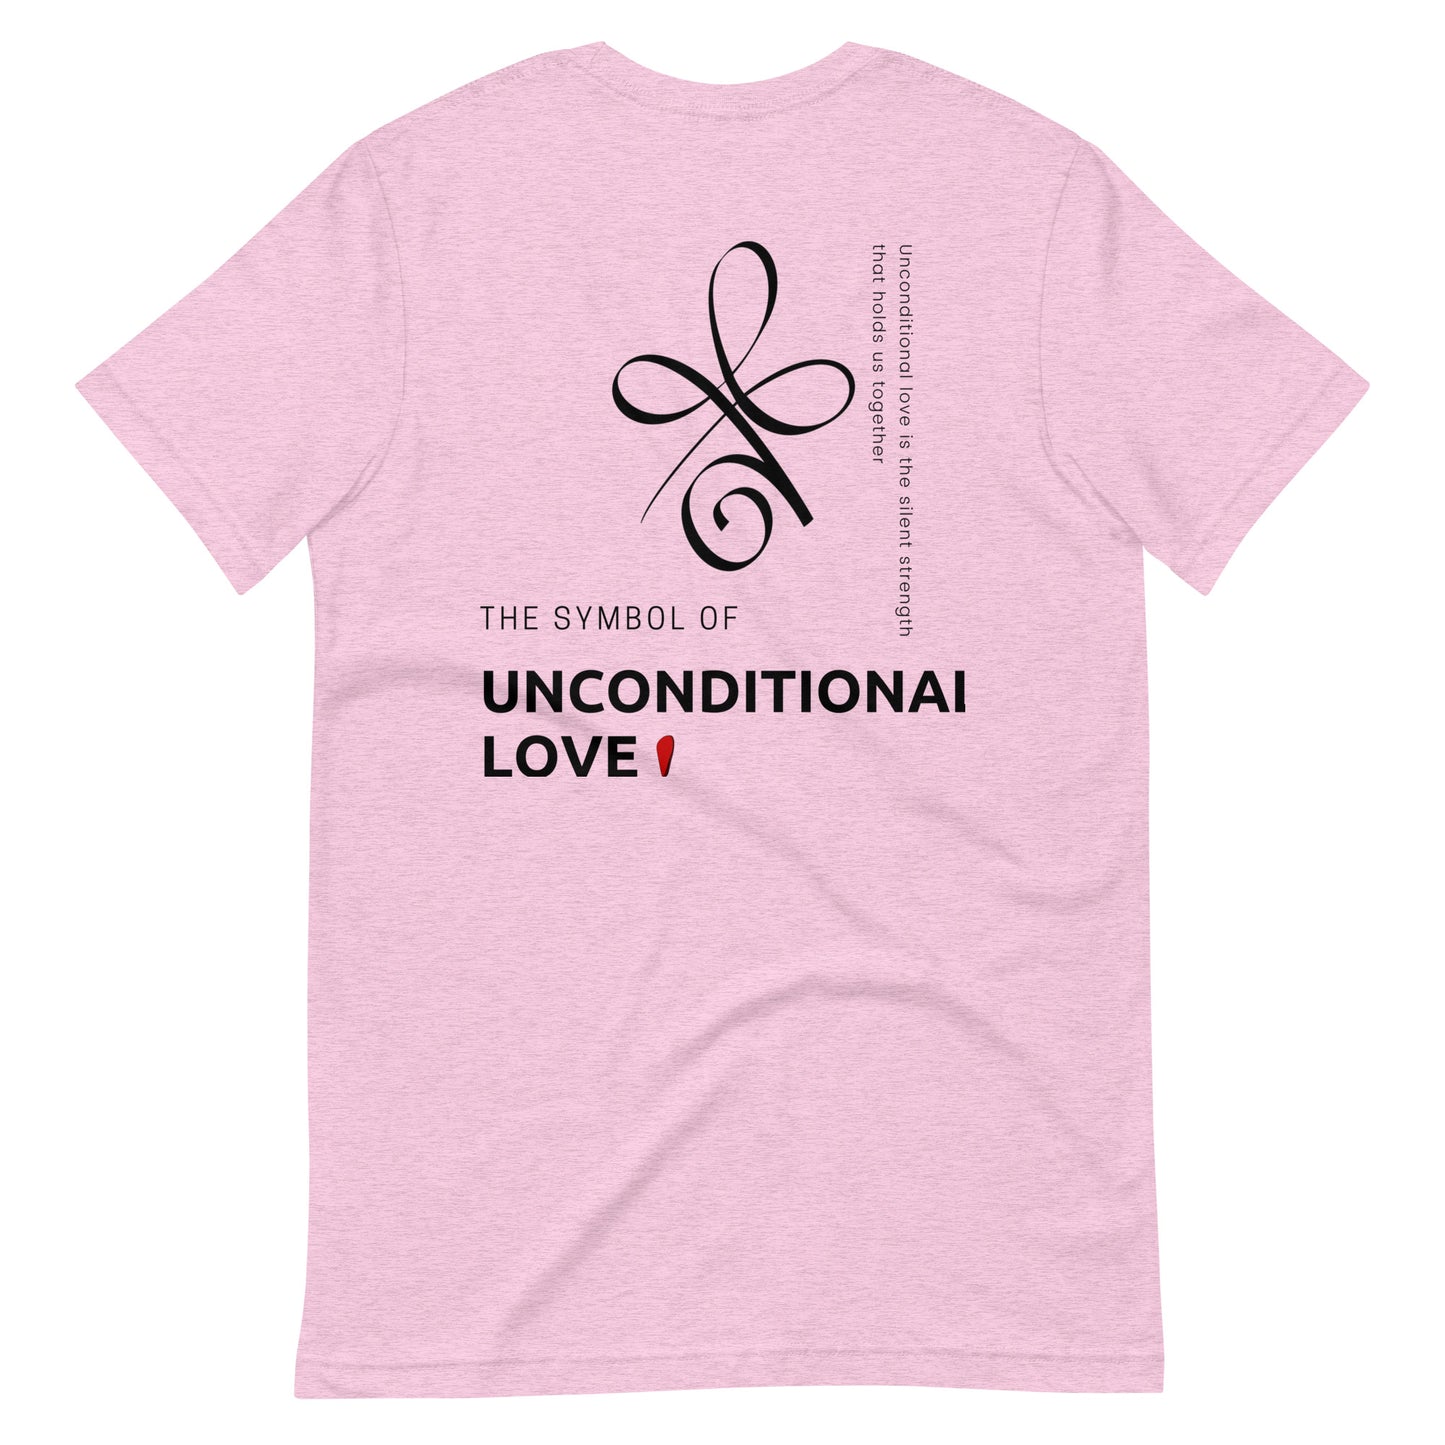 THE SYMBOL OF UNCONDITIONAL LOVE Unisex t-shirt